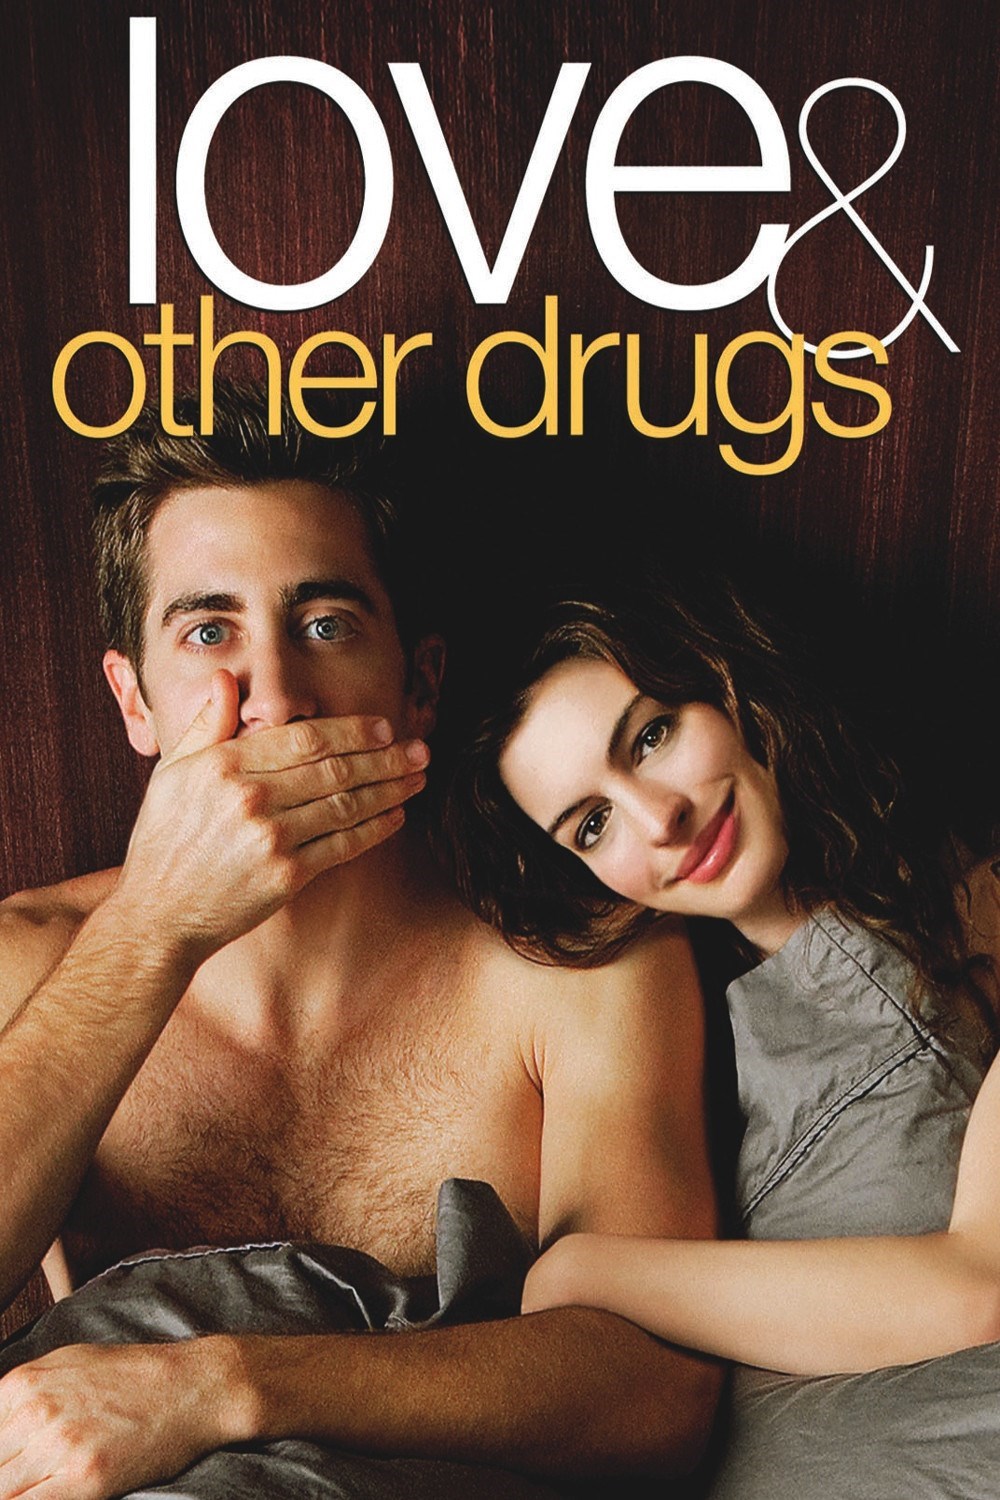 Love & Other Drugs #21